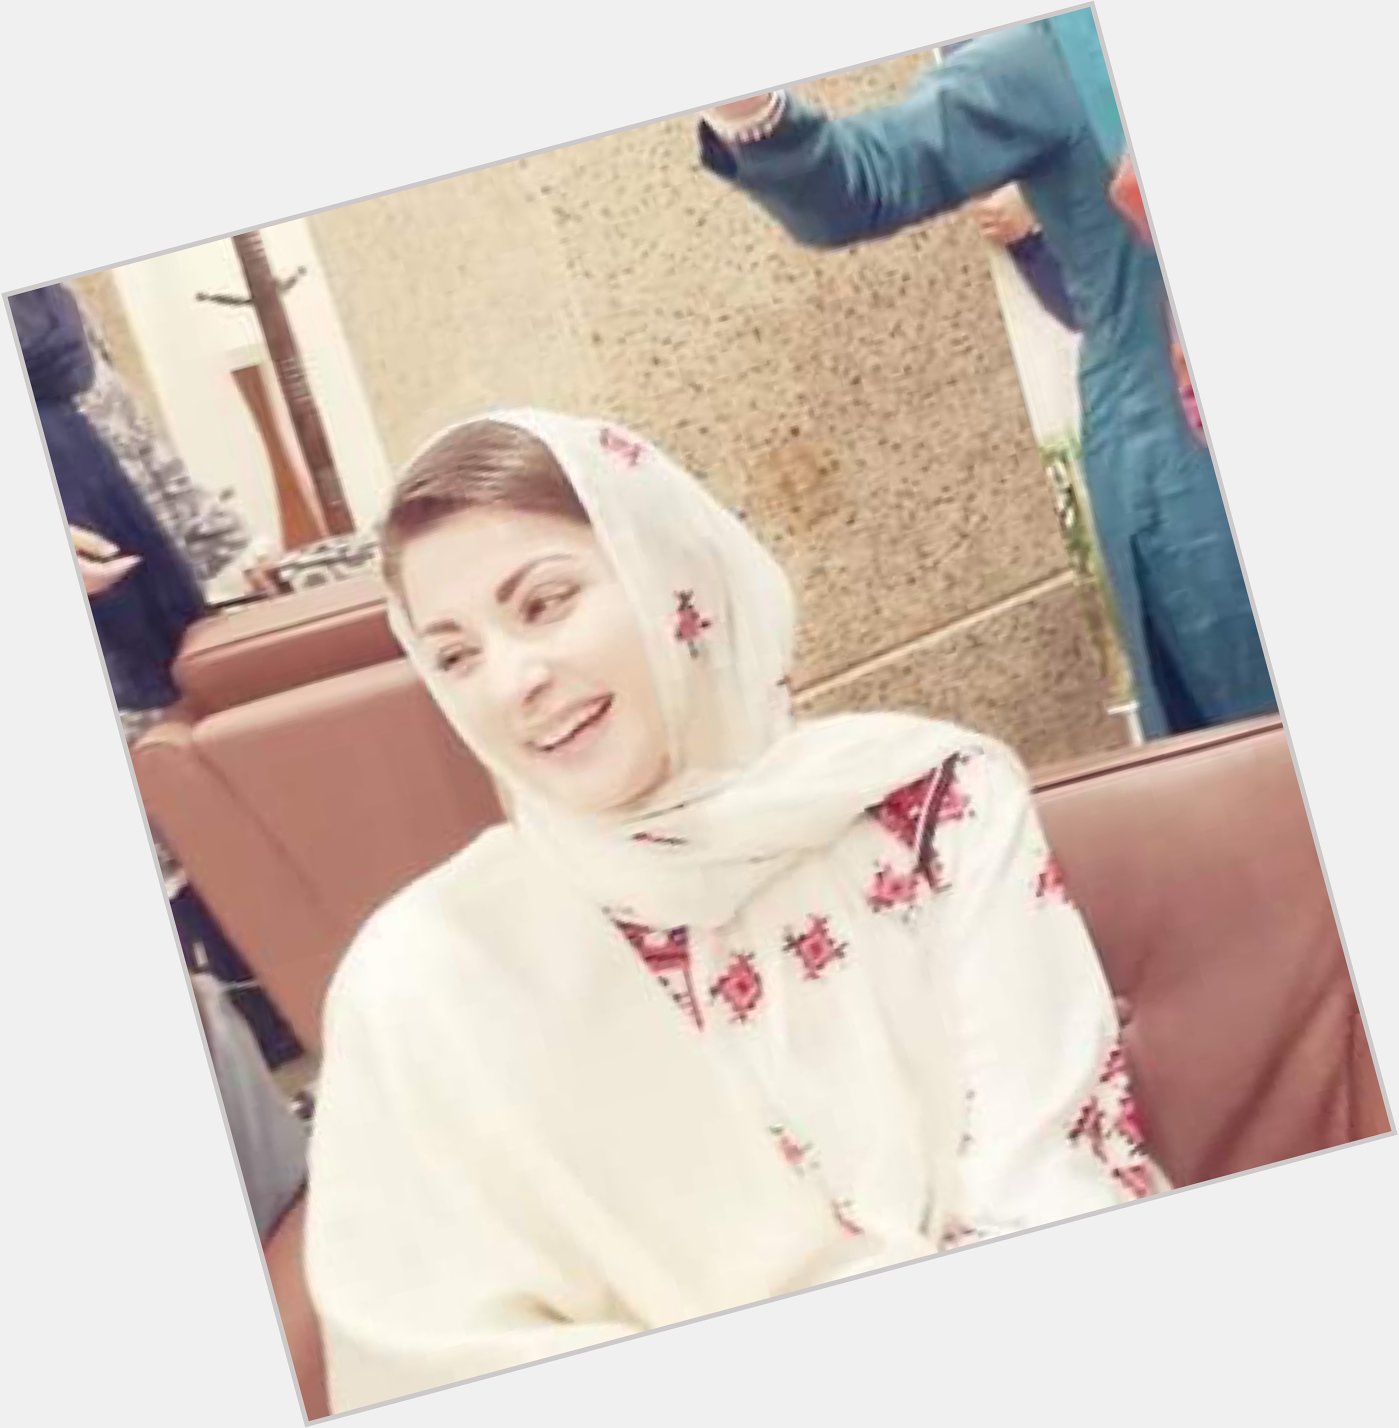 Happy birthday to  Maryam Nawaz Sharif  May you have many more in your life. Stay blessed Mam  